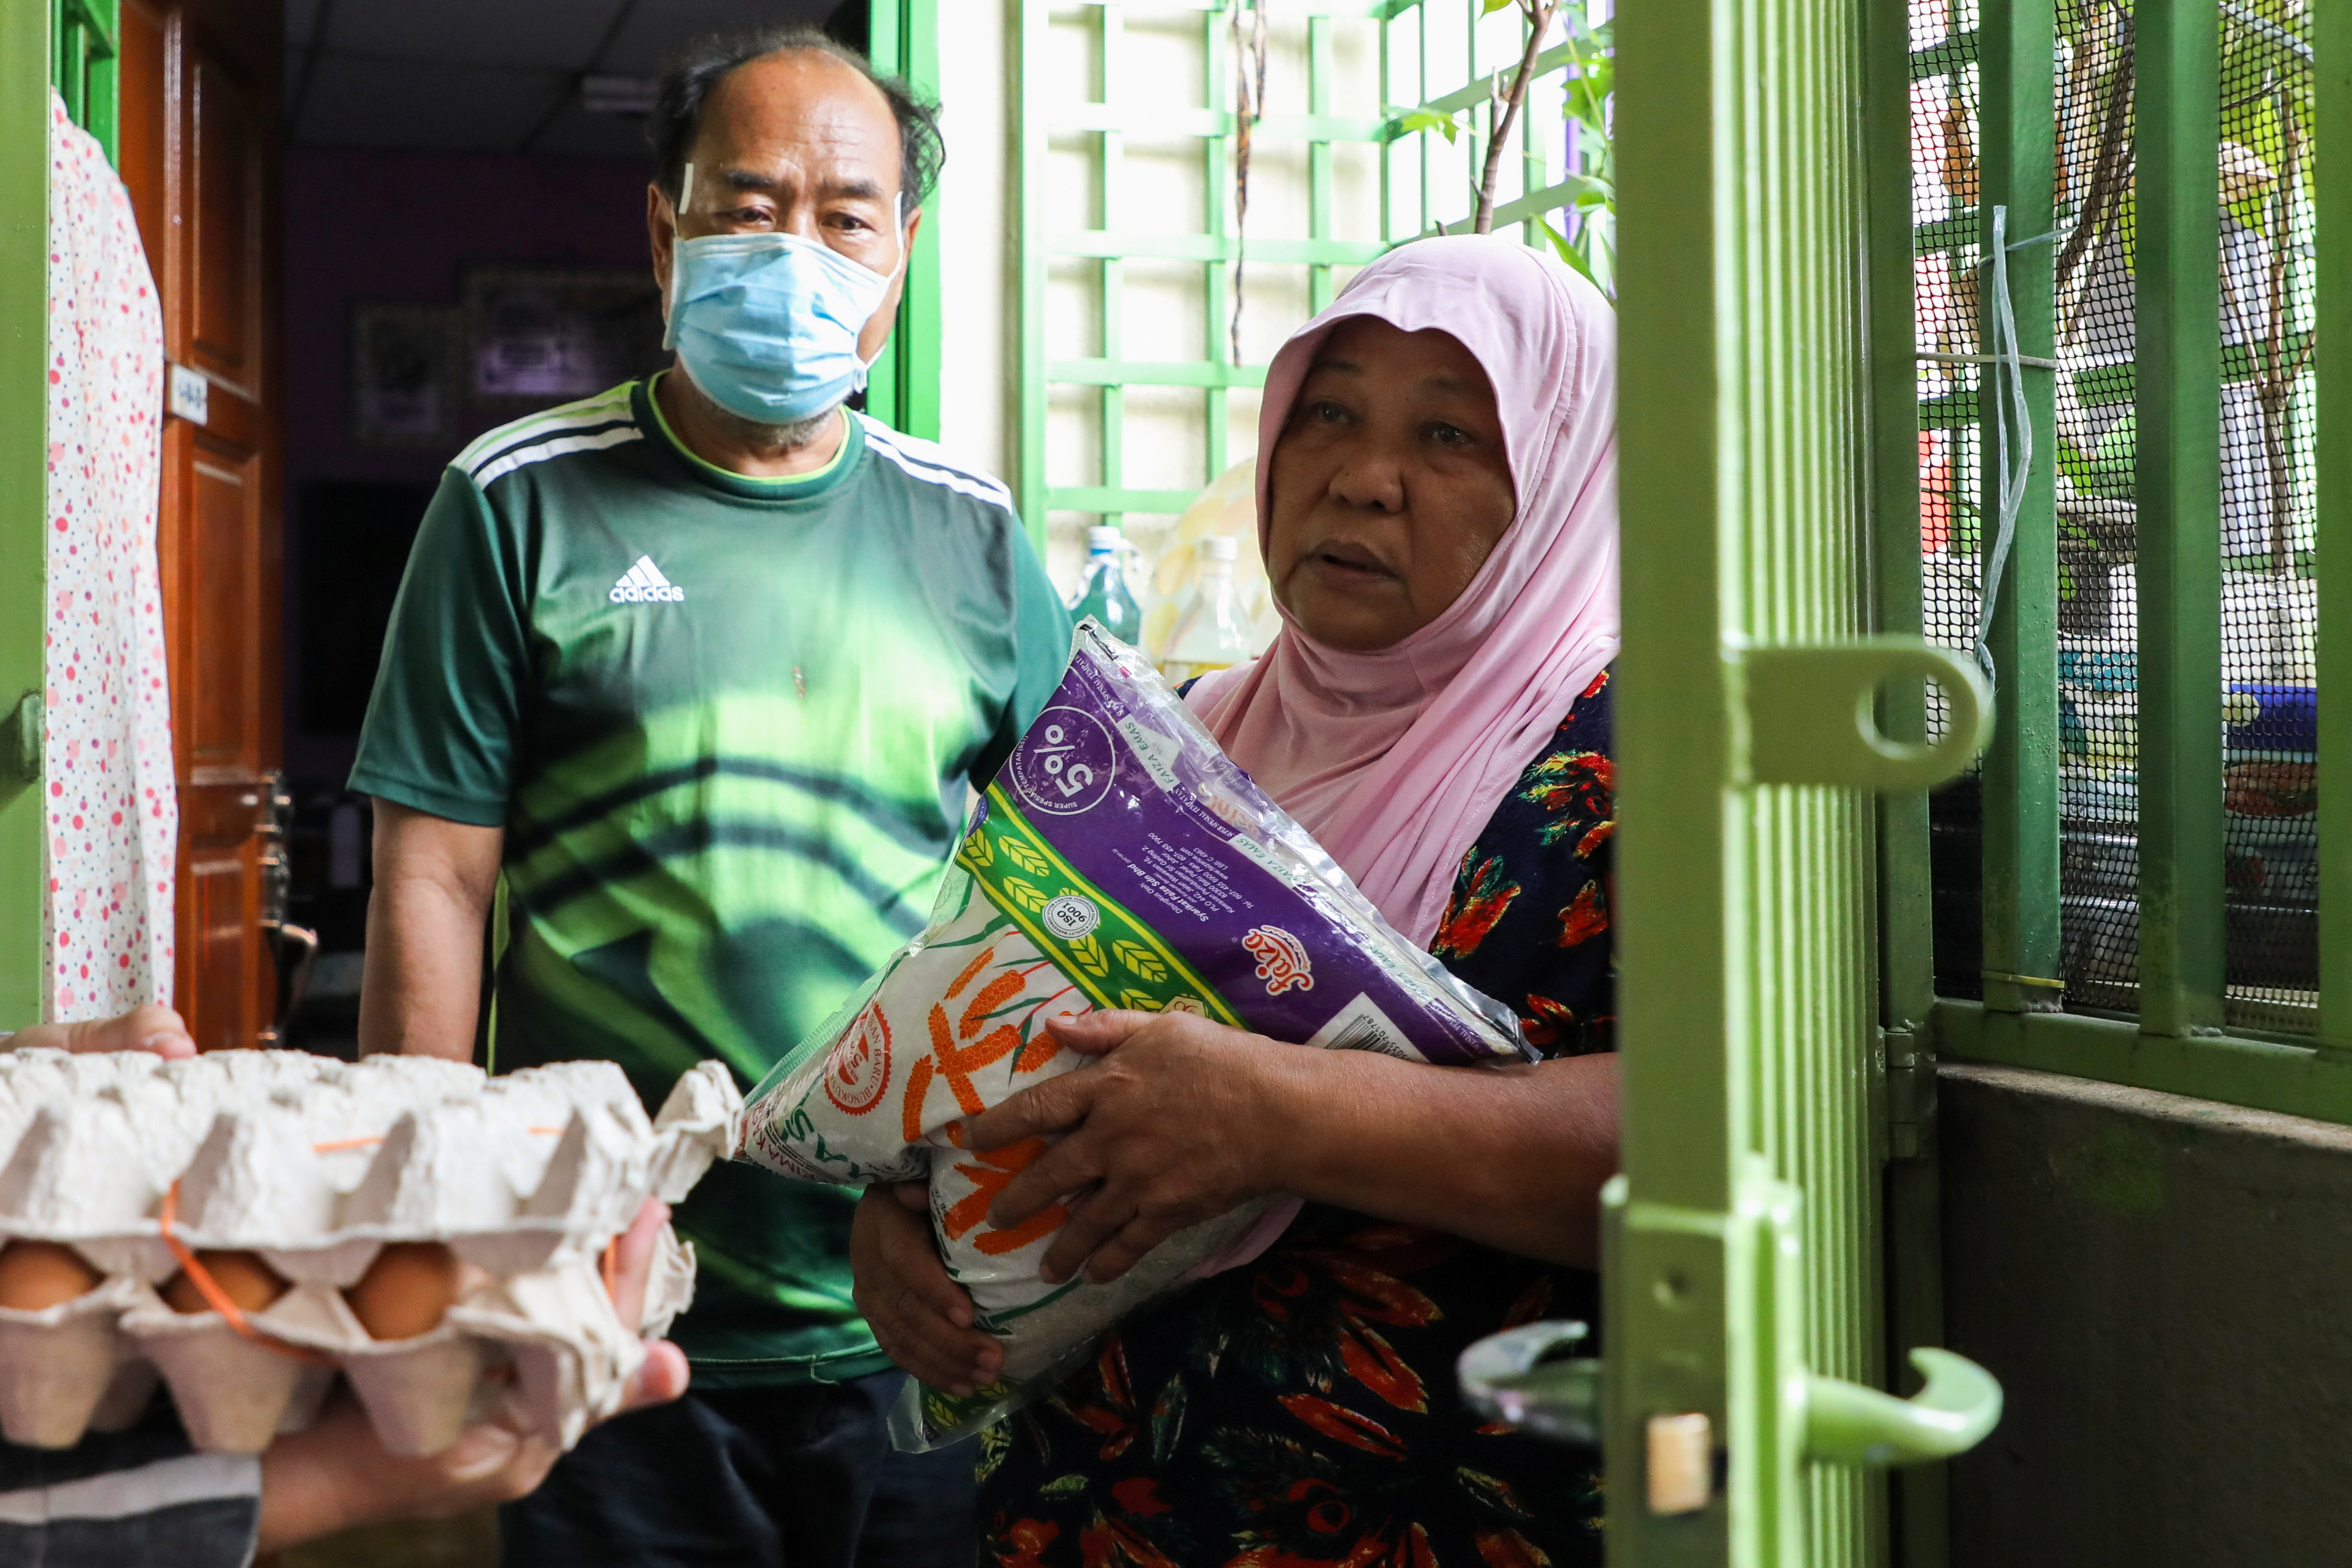 Halijah Naemat, 74, receives food supplies after she hung a white flag outside her home asking for help during an enhanced lockdown in Petaling Jaya